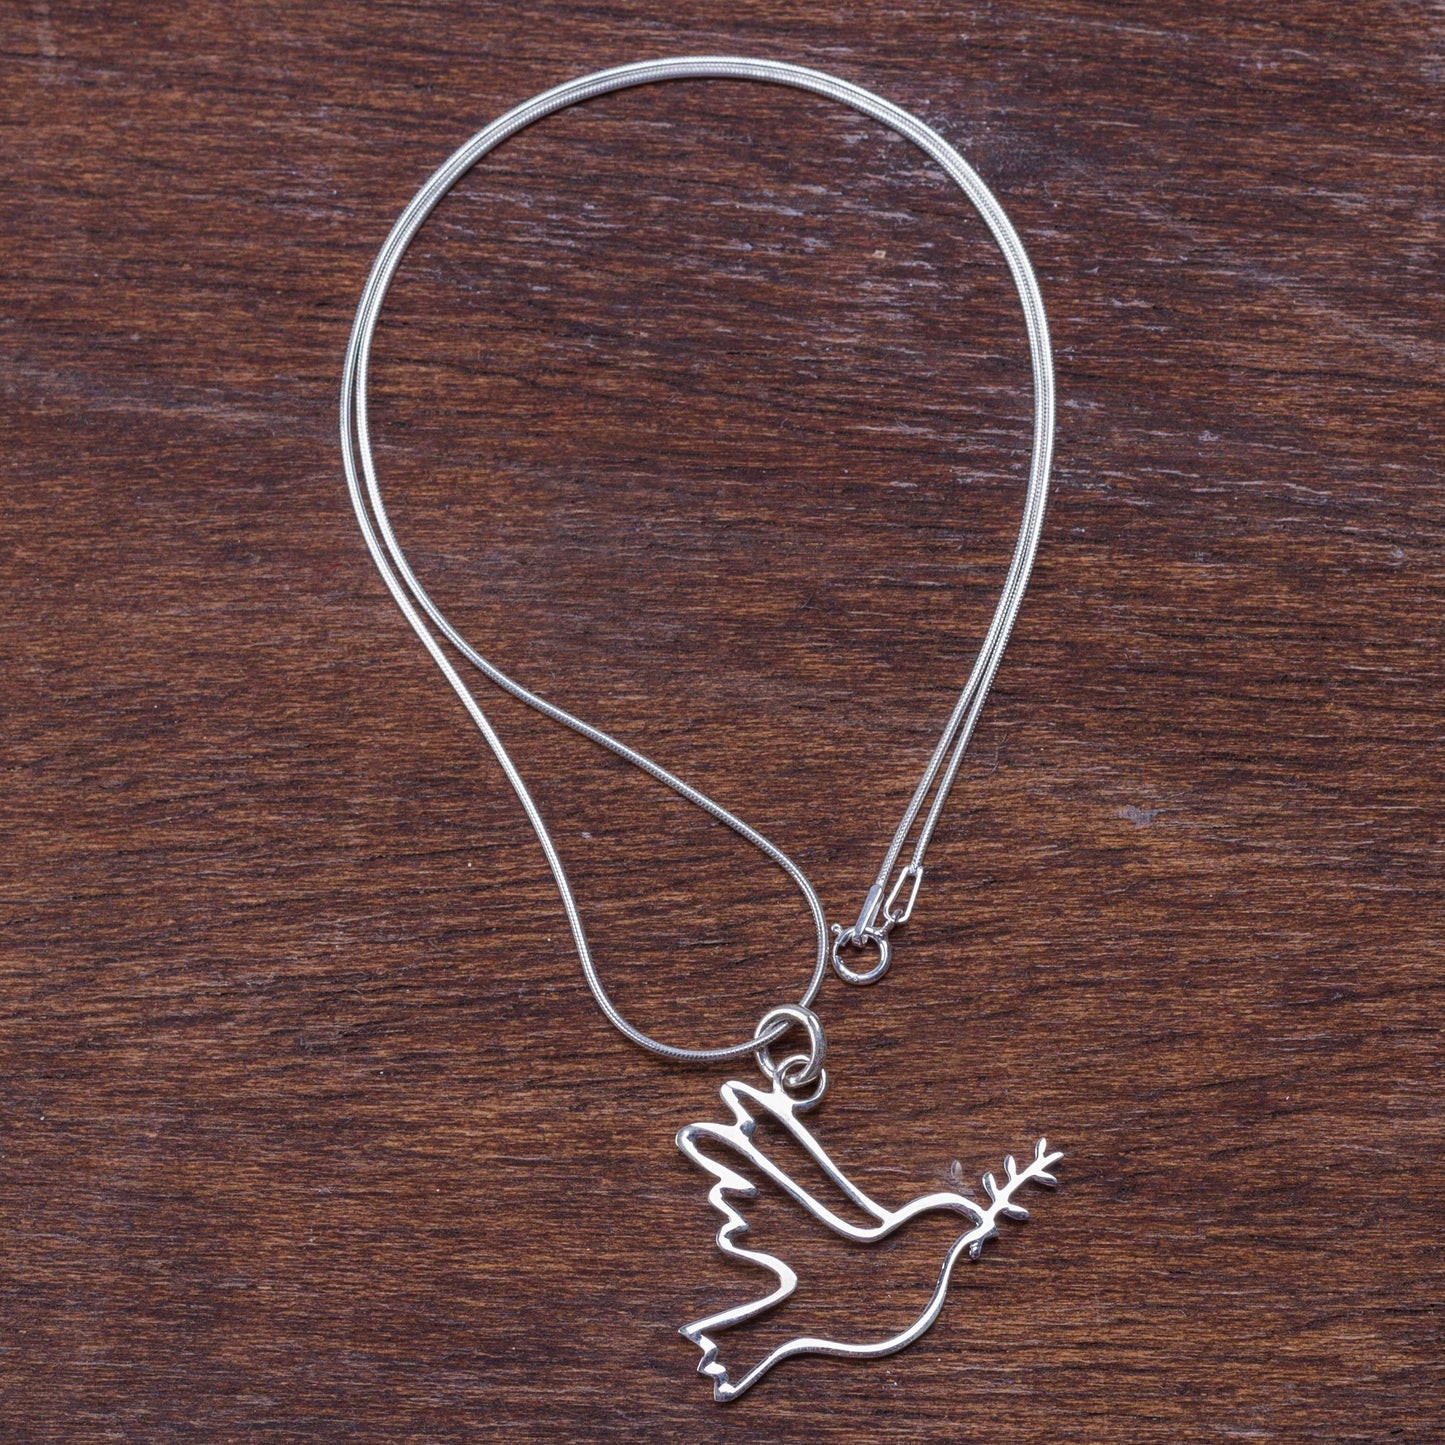 Quechua Dove Sterling Silver Necklace